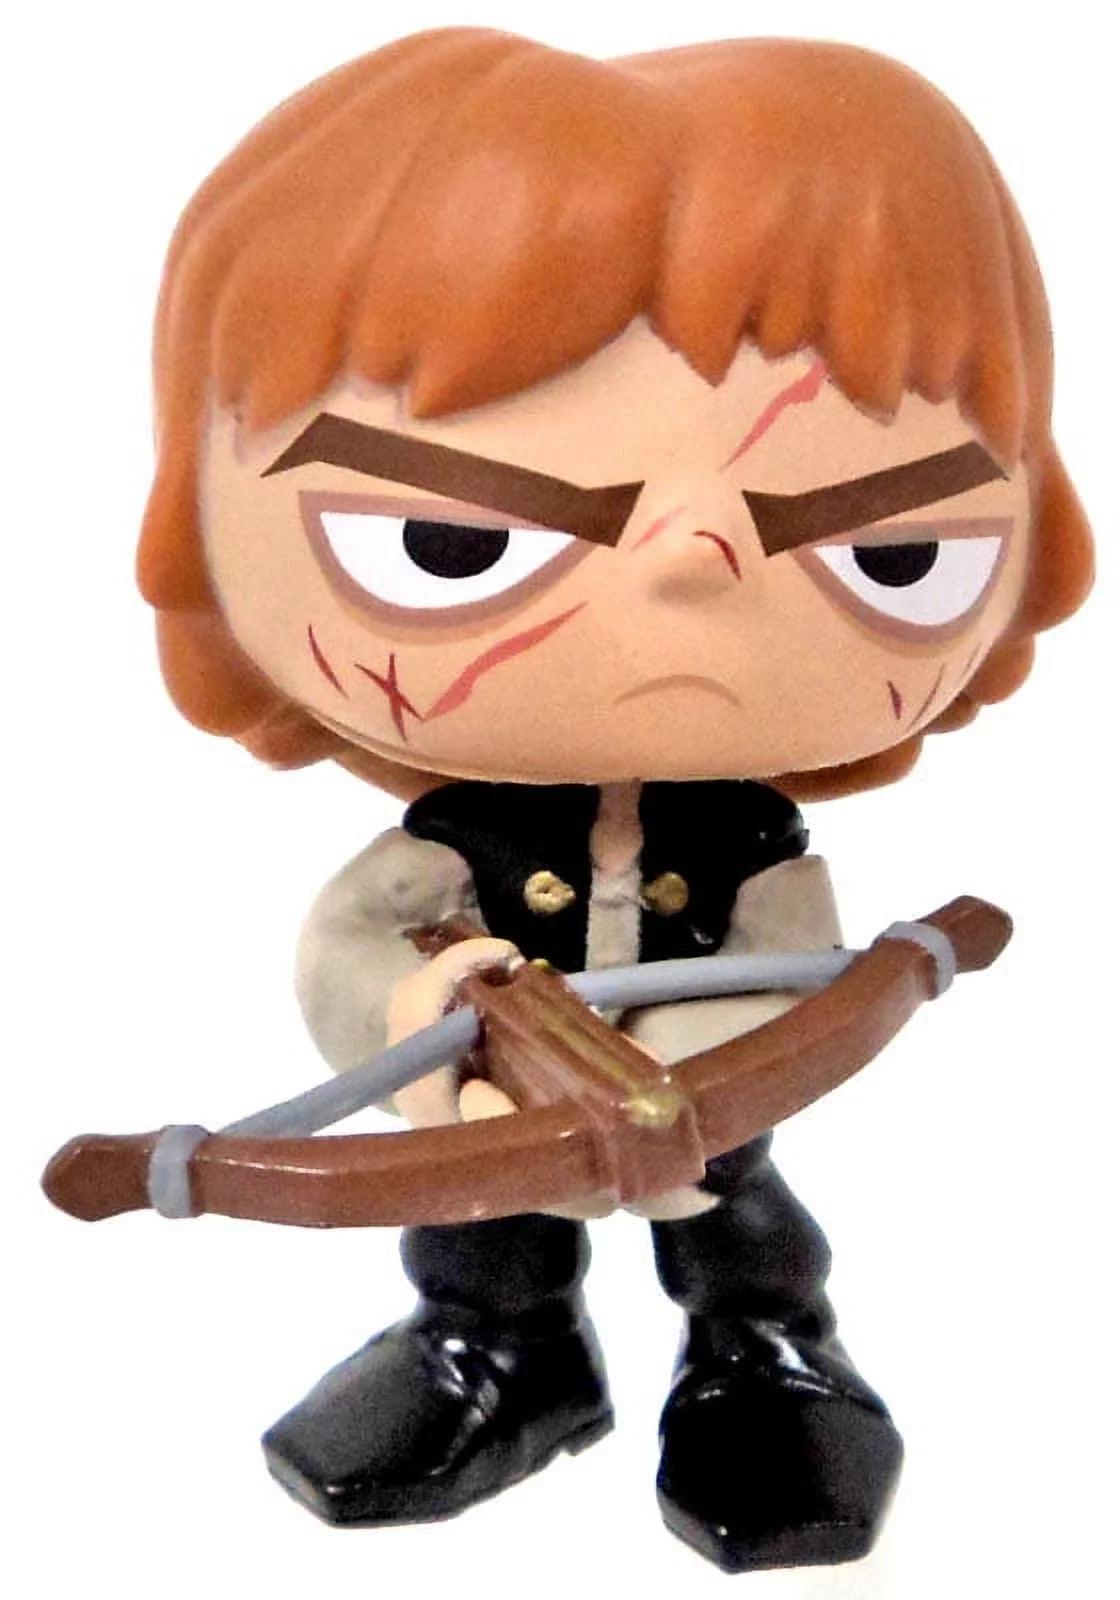 Minifigure - Funko Mystery Minis Tyrion balestra 5 cm 1/12 serie 2 - GAME OF THRONES - Magic Dreams Store